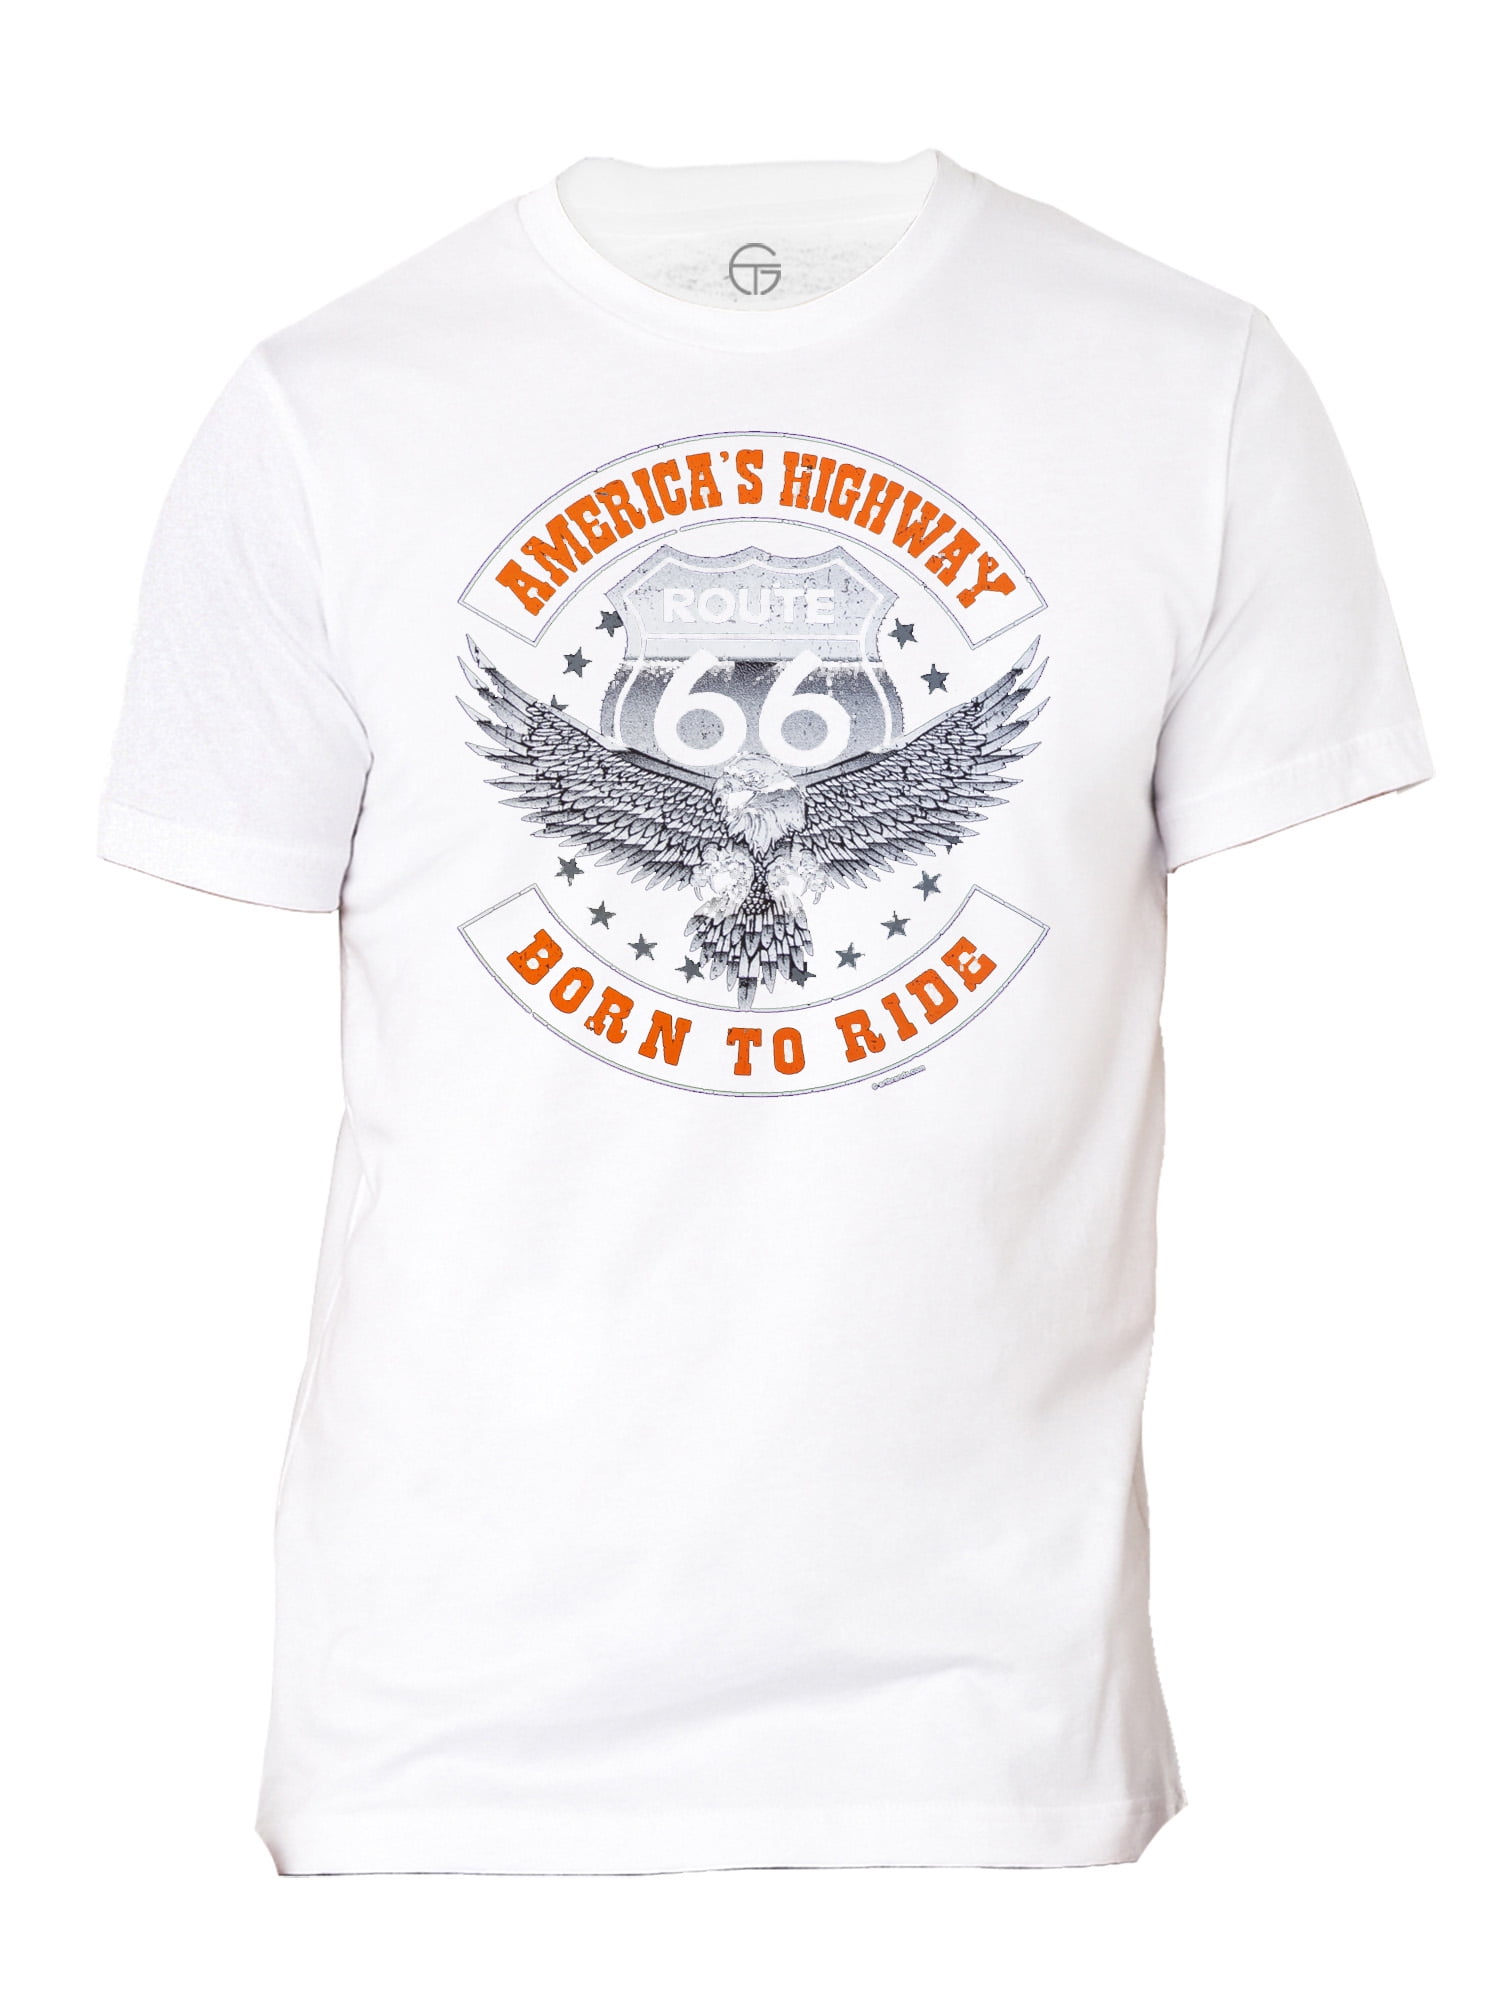 Route 66 Born to Ride Mens Short-Sleeve T-Shirt - White - Small ...